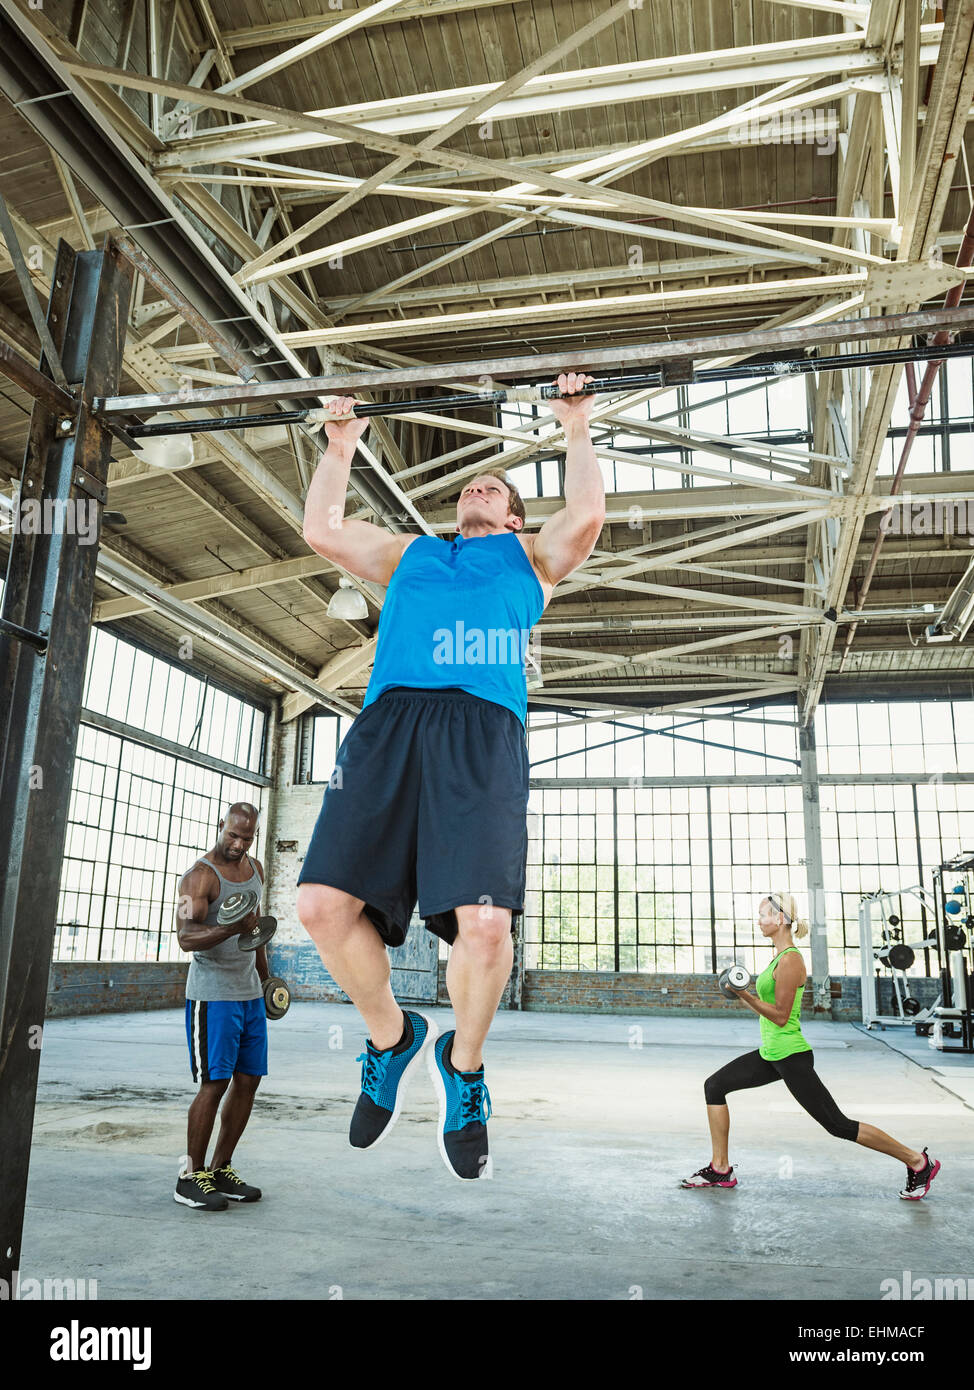 Athlete doing pull-ups in warehouse gym Stock Photo